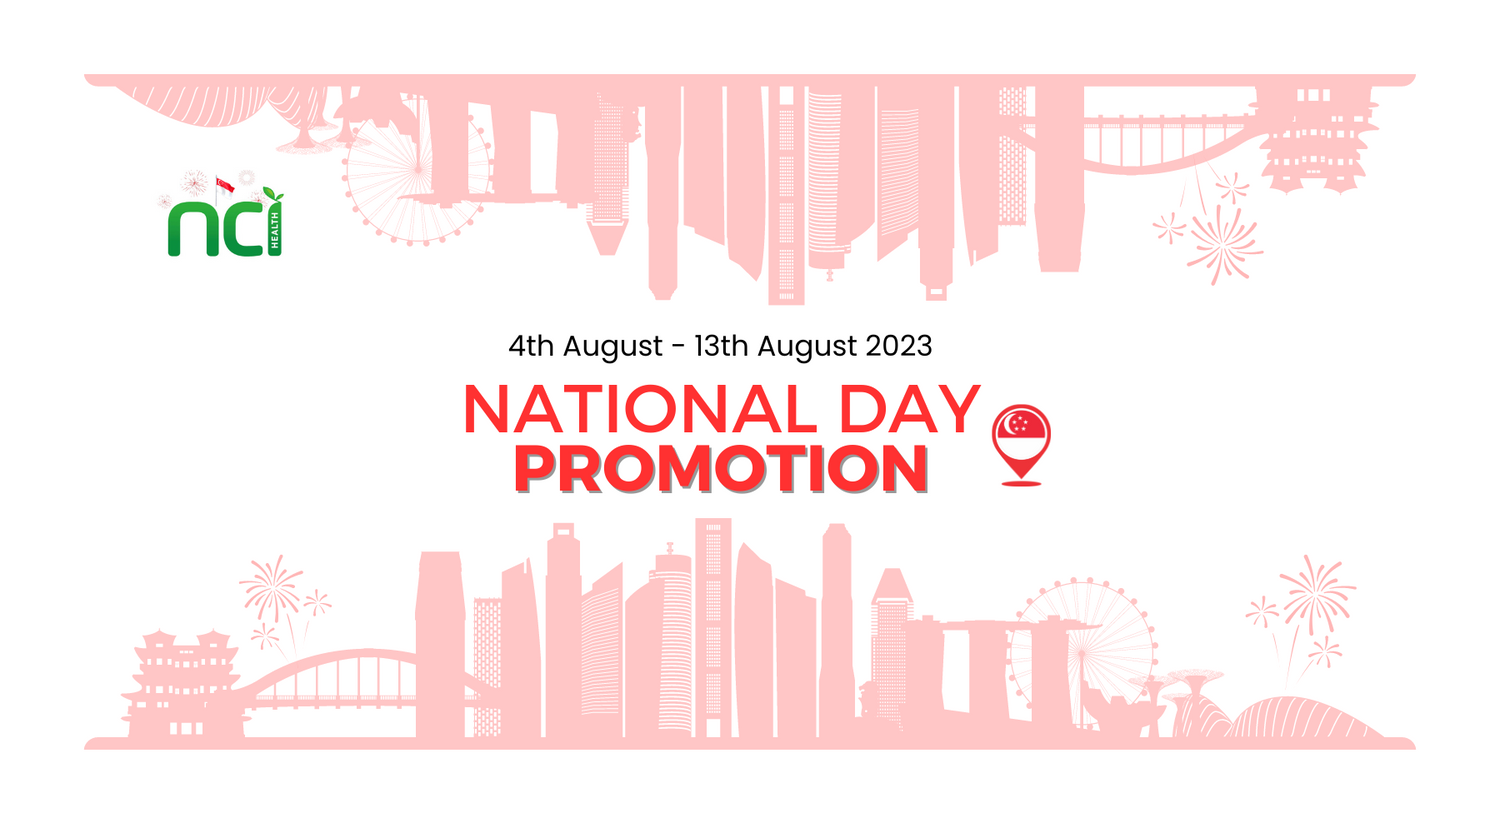 National Day Promotion 2023